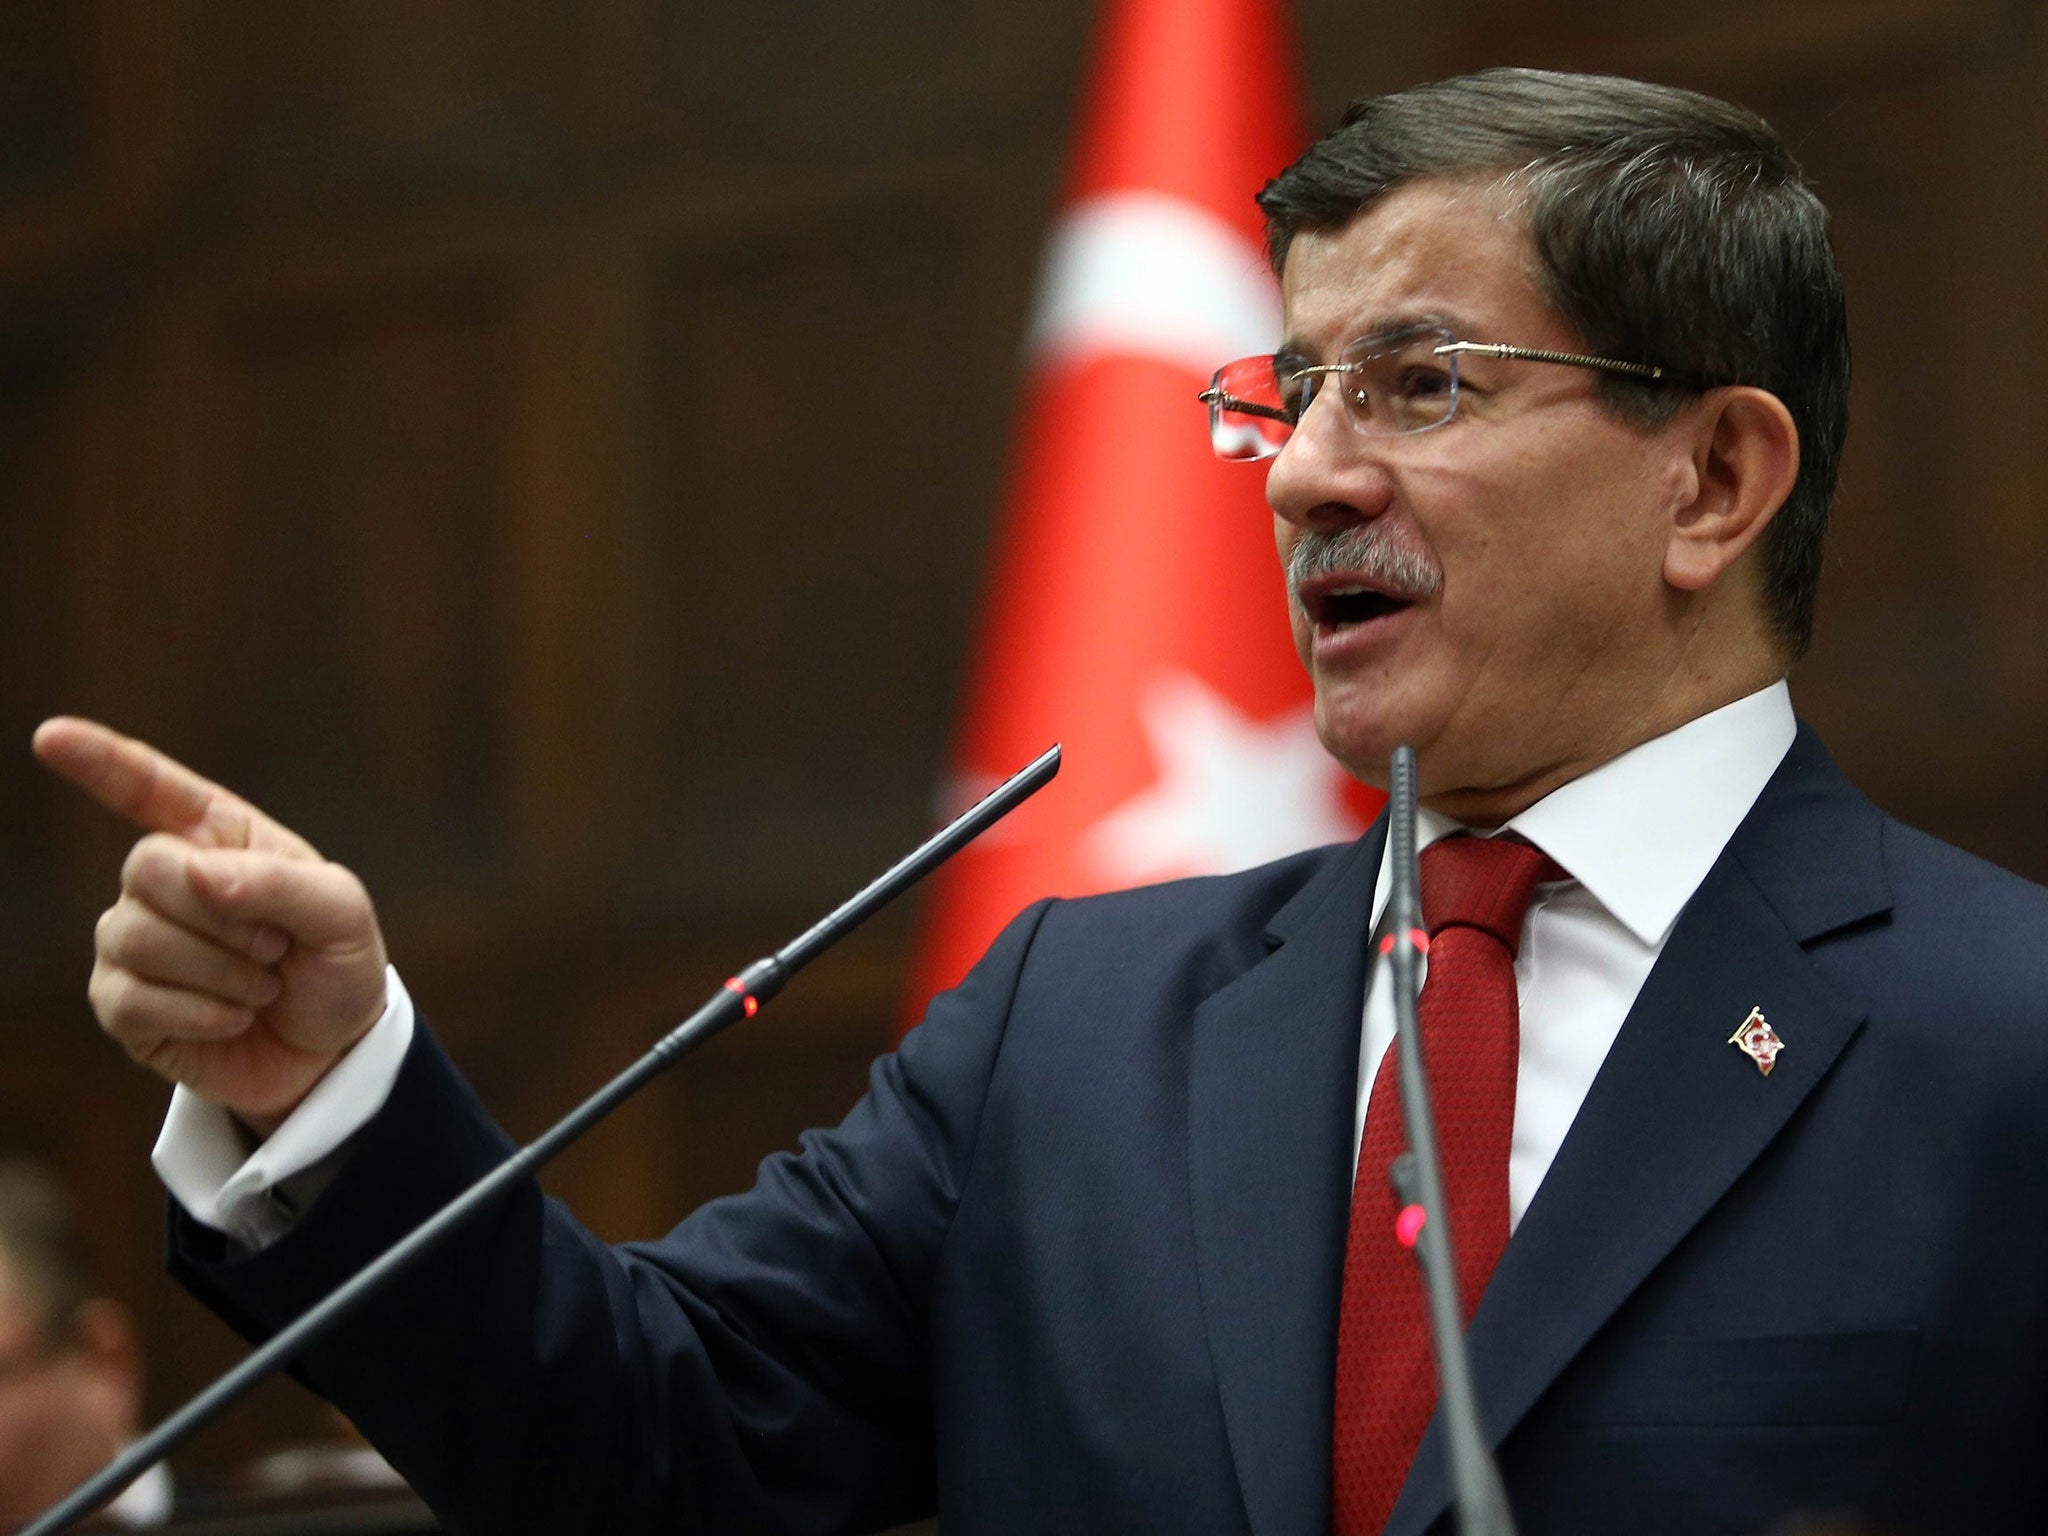 Turkey's Prime Minister Ahmet Davutoglu speaks during the parliamentary group meeting of Turkey's ruling Justice and Development Party at the Grand National Assembly of Turkey on January 13, 2015